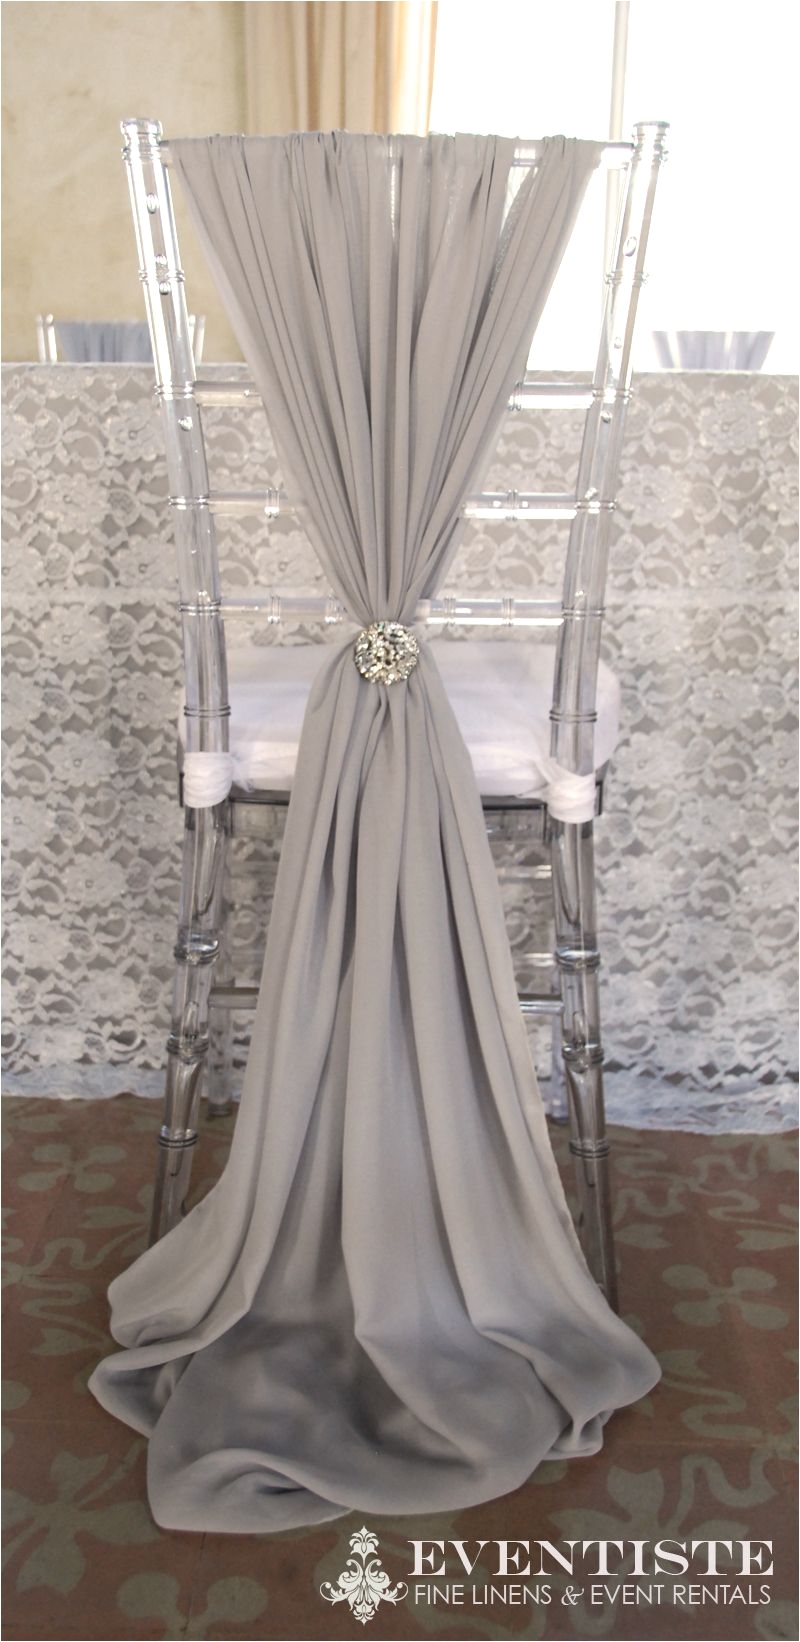 Cheap Wedding Chair Cover Rentals Singapore Chiffon Melissa Chair Cover Perfect for Sitting by Yourself or with